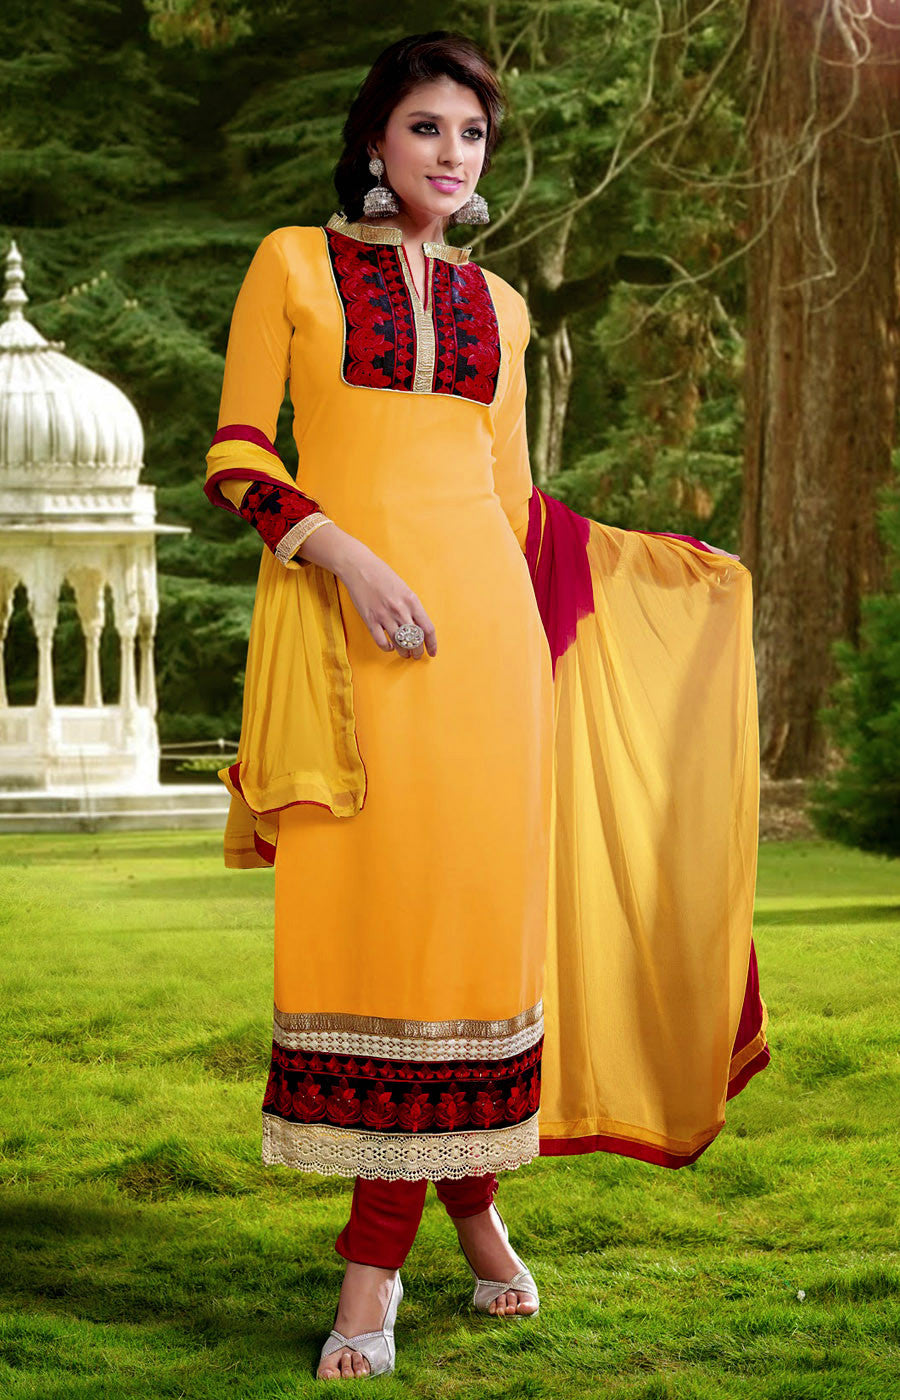 The Gavya YELLO AND RED Designer Kurti Pant Dupatta Set, For Casual Wear,  Size: M'l'xl'xxl at Rs 796/piece in Jaipur